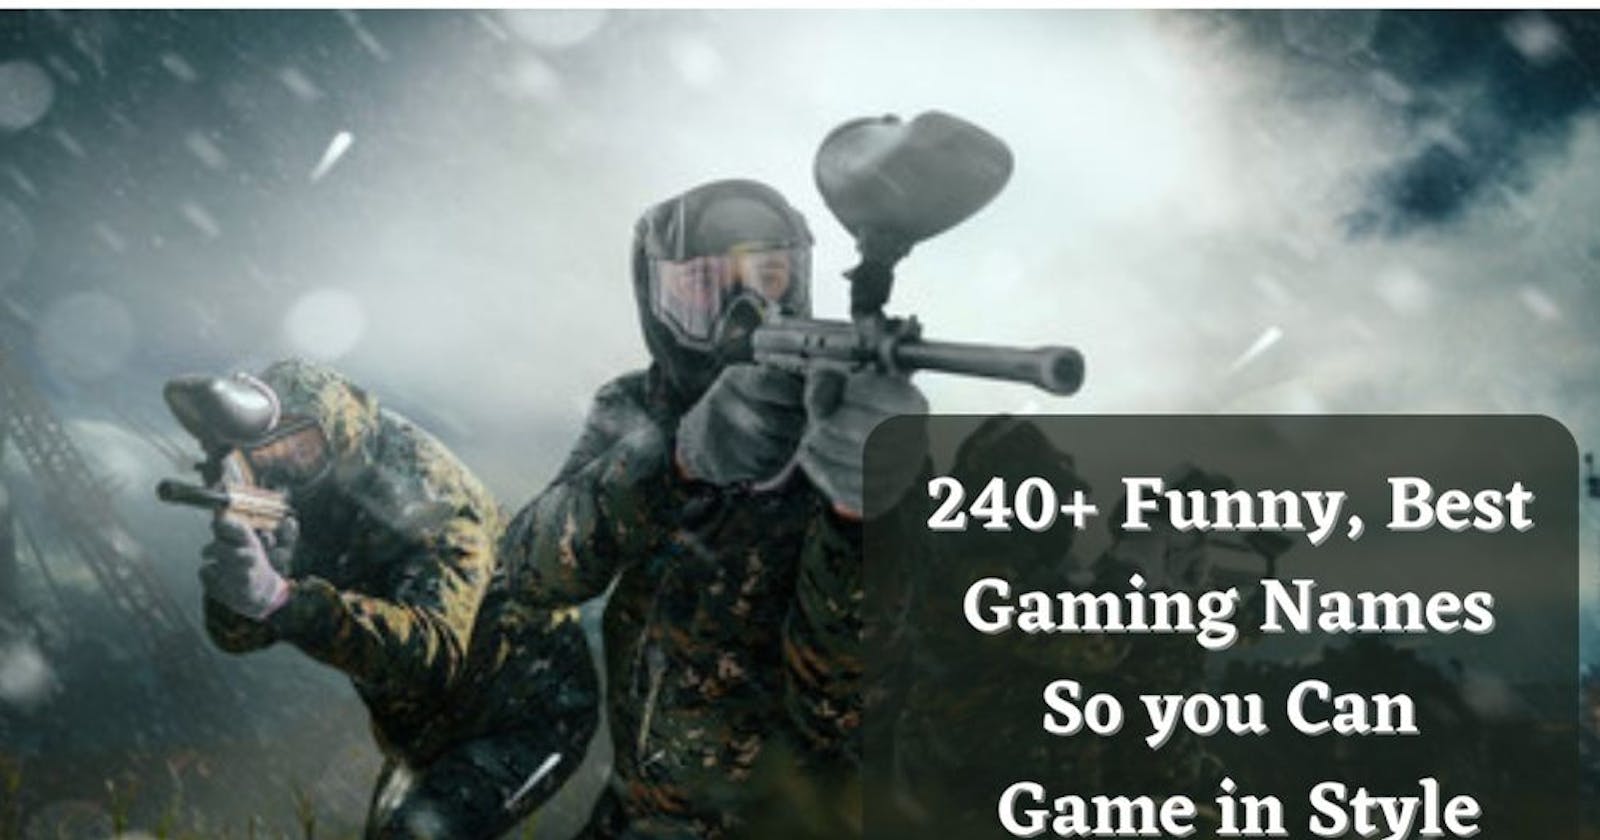 240+ Funny, Best Gaming Names So you can Game in style